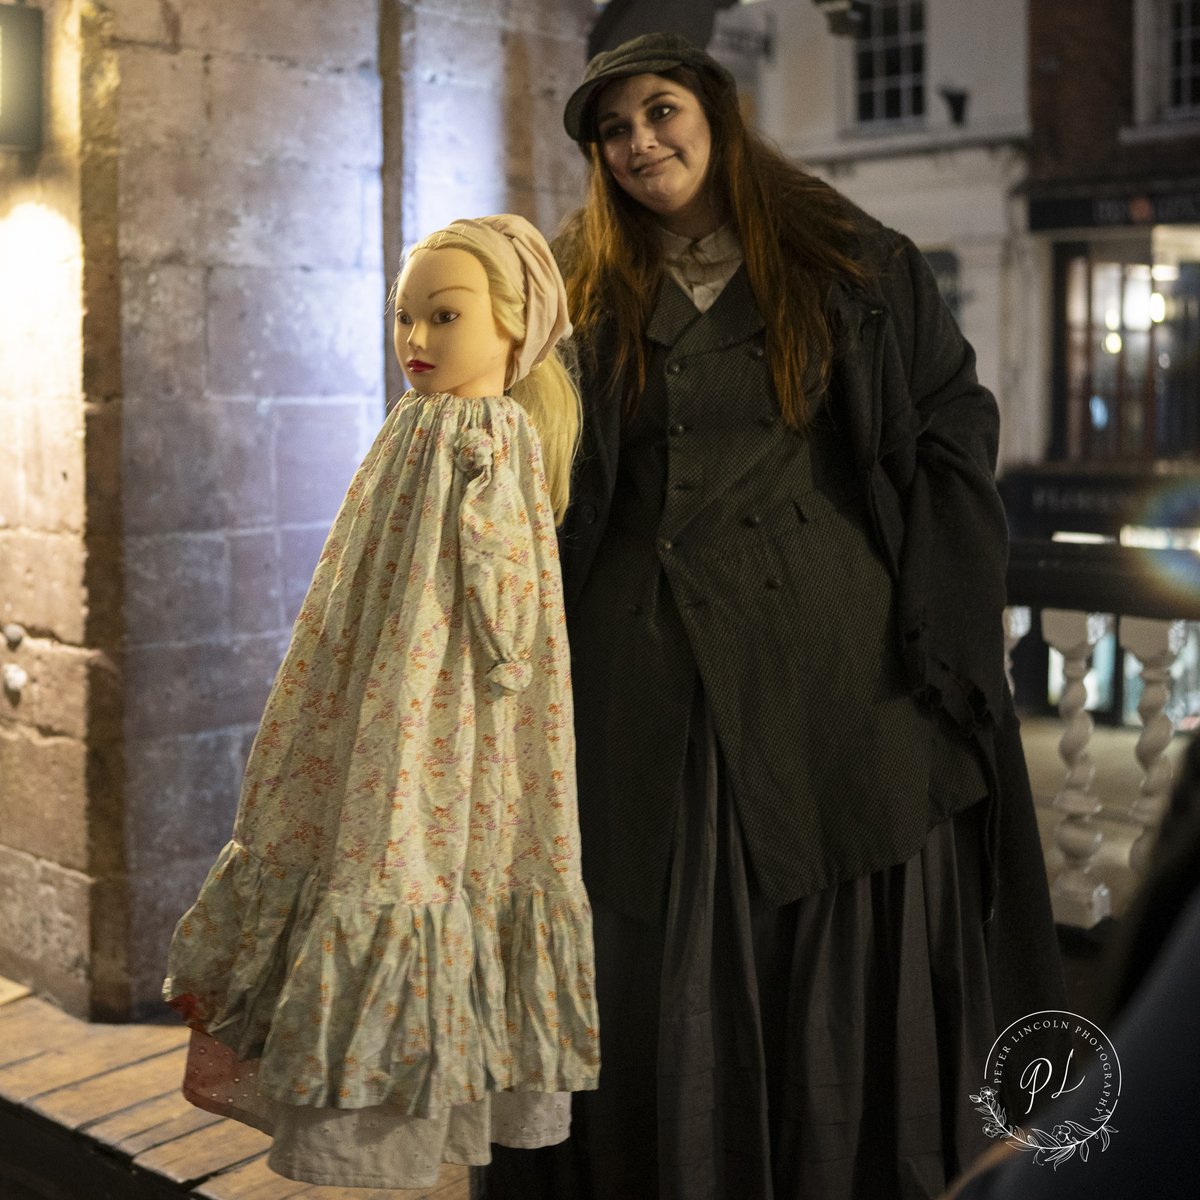 Don't mind us, just staring into your soul :)

#paranormal #walkingtour #deadgoodghosttour #haunted #chestertourism #ghosts #ghosttours #chestertour